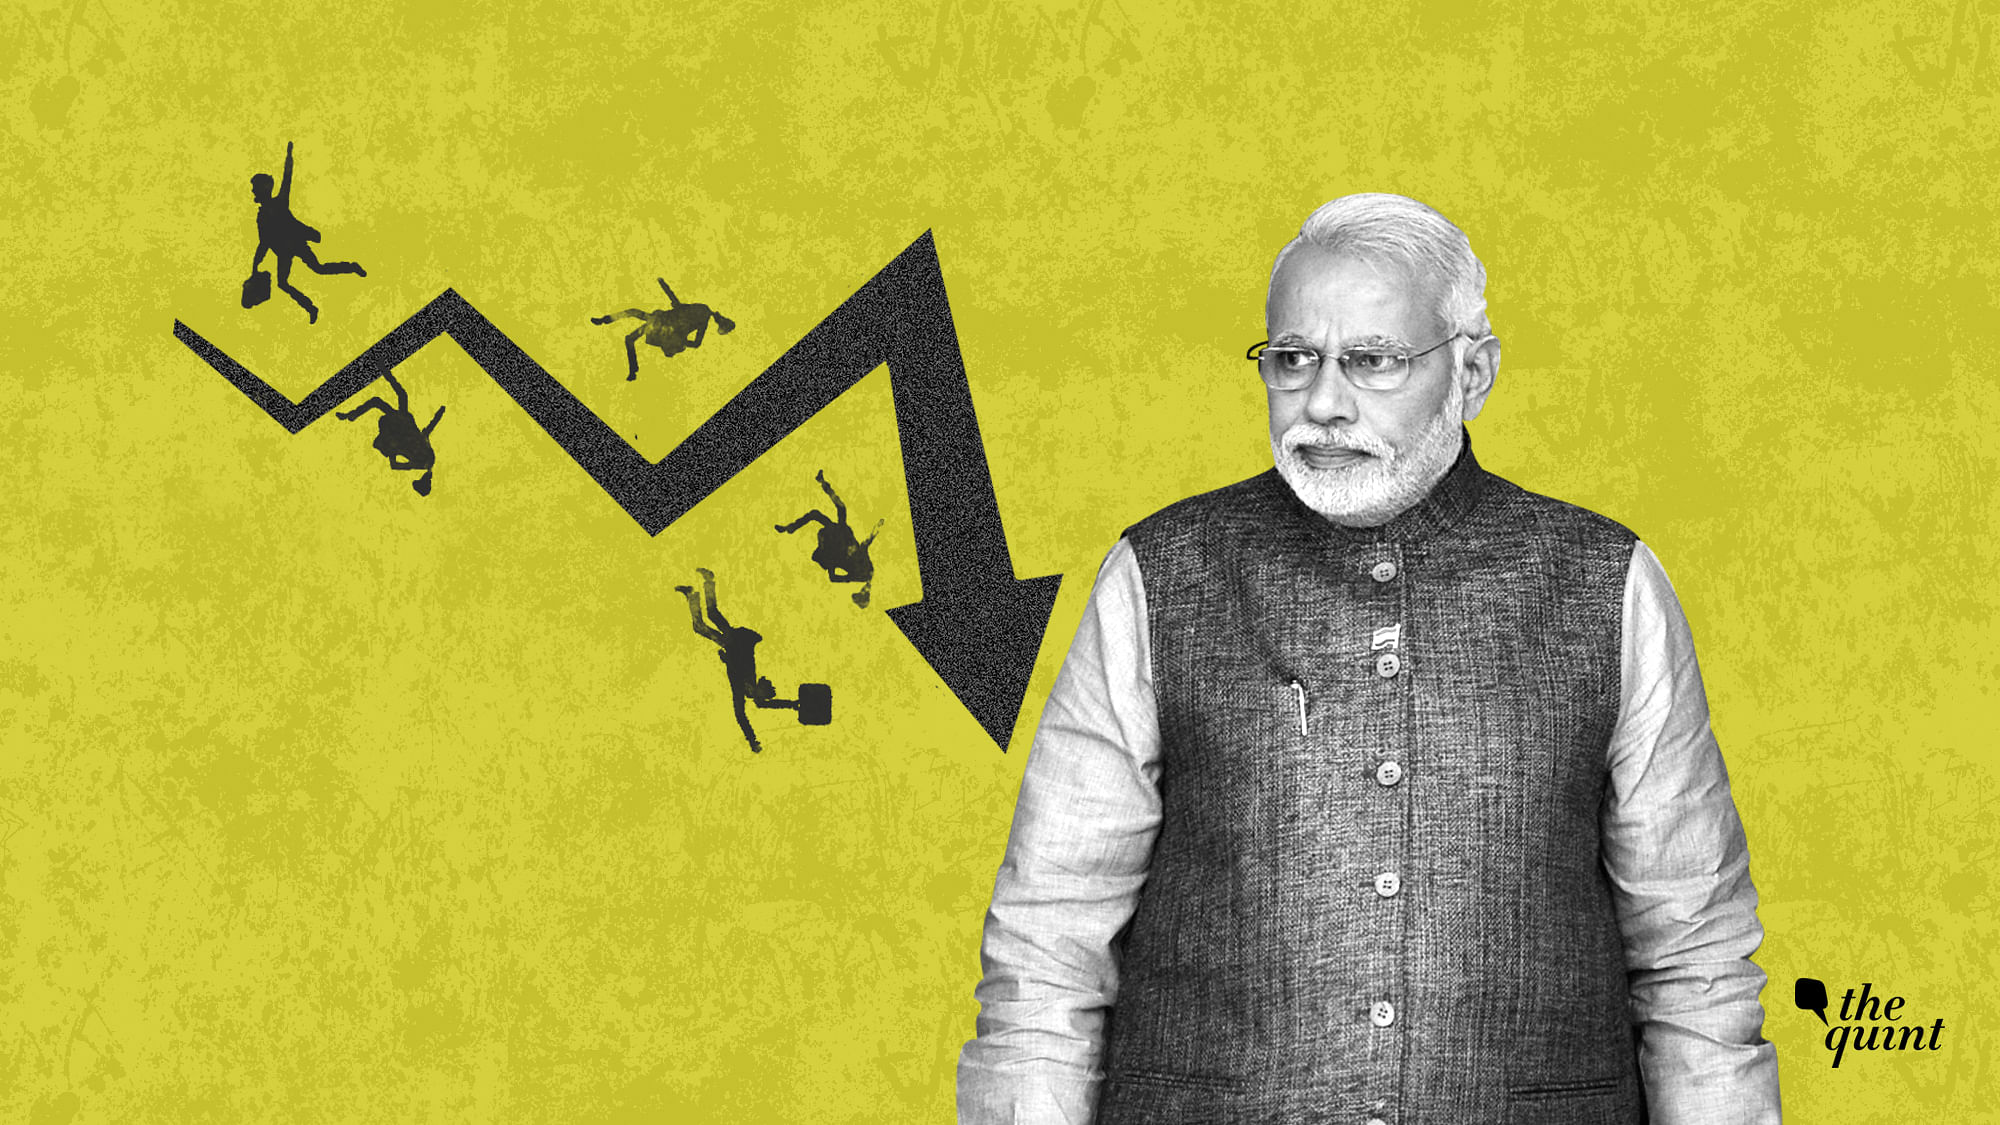 <div class="paragraphs"><p>BJP &amp; Inequality: The recent <ins><a href="https://economictimes.indiatimes.com/news/economy/indicators/india-amongst-the-most-unequal-countries-in-the-world-report/articleshow/88141807.cms?from=mdr" rel="noreferrer noopener">‘</a><a href="https://www.thequint.com/news/india/india-poor-very-unequal-world-inequality-report-2022" rel="nofollow">Wealth Inequality Report, 2022’</a></ins> has declared India as one of the most unequal countries in the world.</p></div>